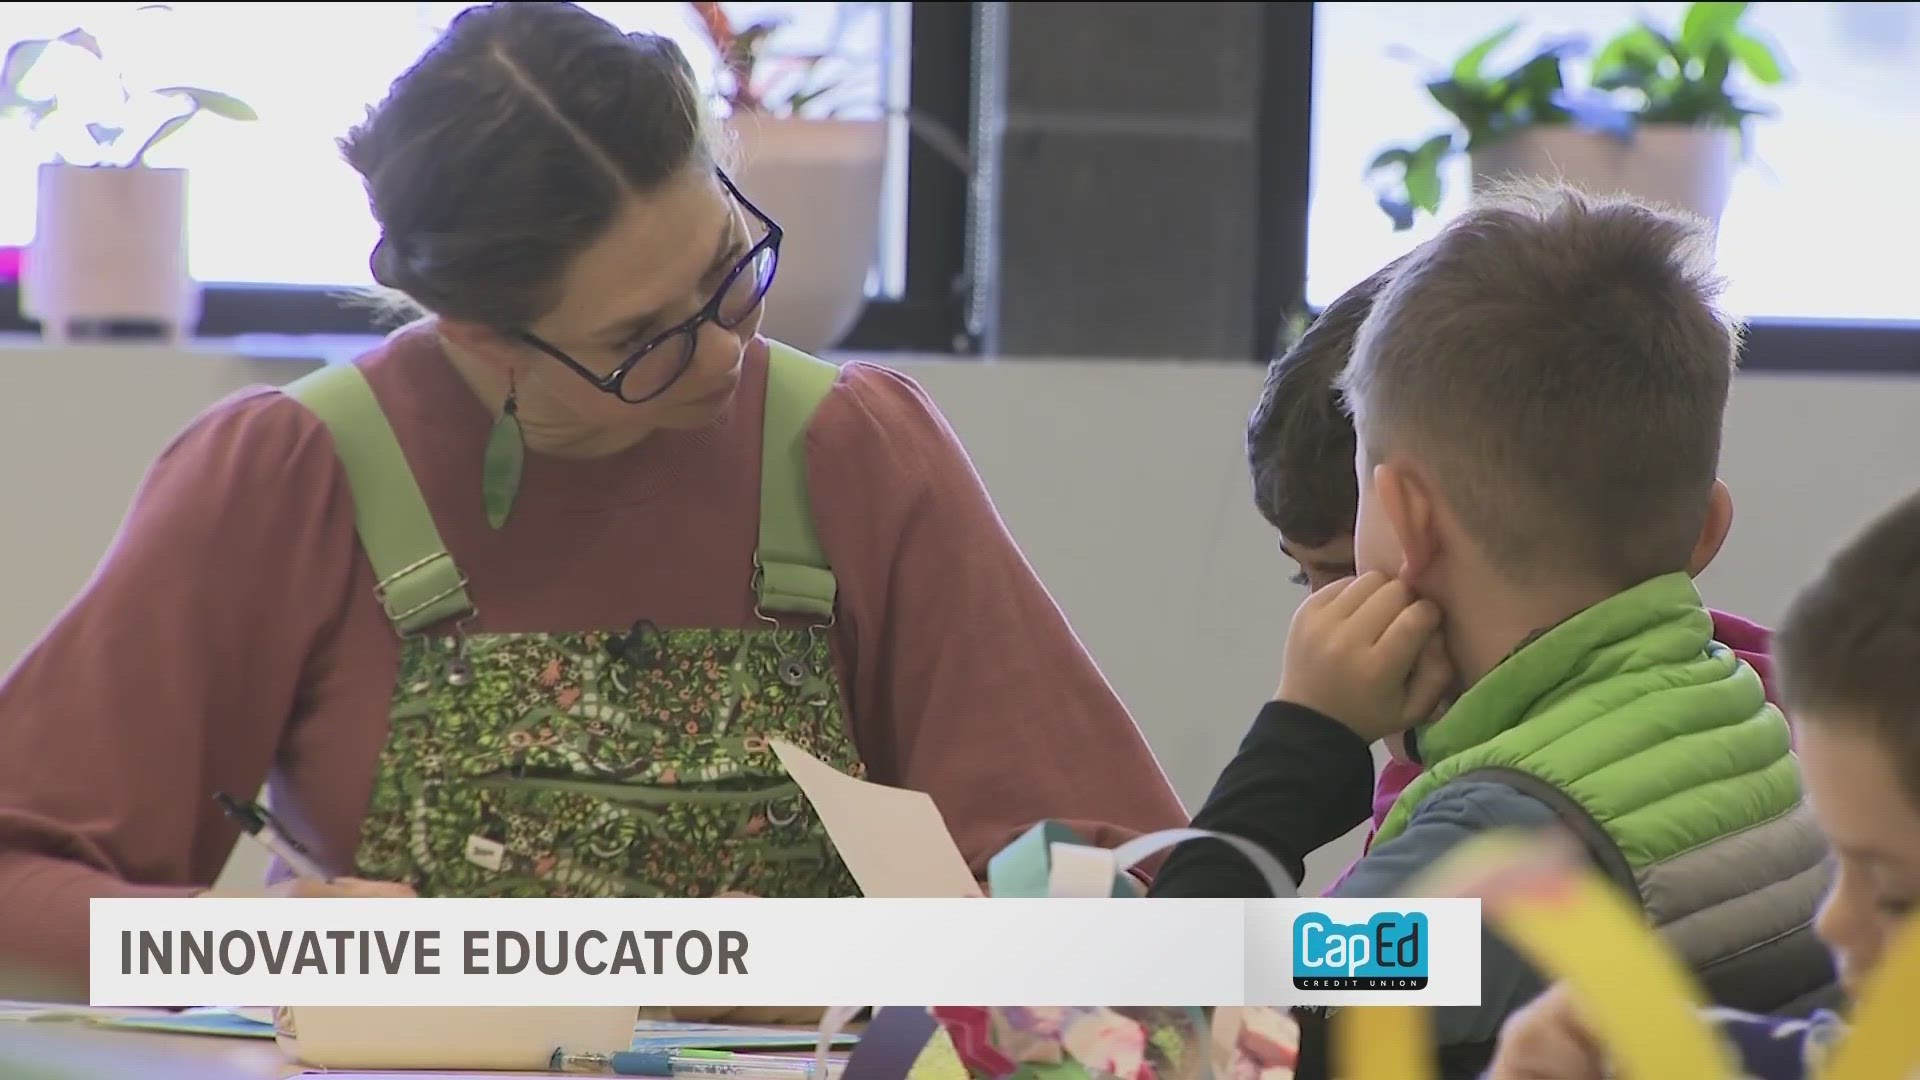 Christina Wilkens of Future Public School is the featured Innovative Educator for week of May 11, 2023. With her CapEd Foundation Grant, she added a fiber center.